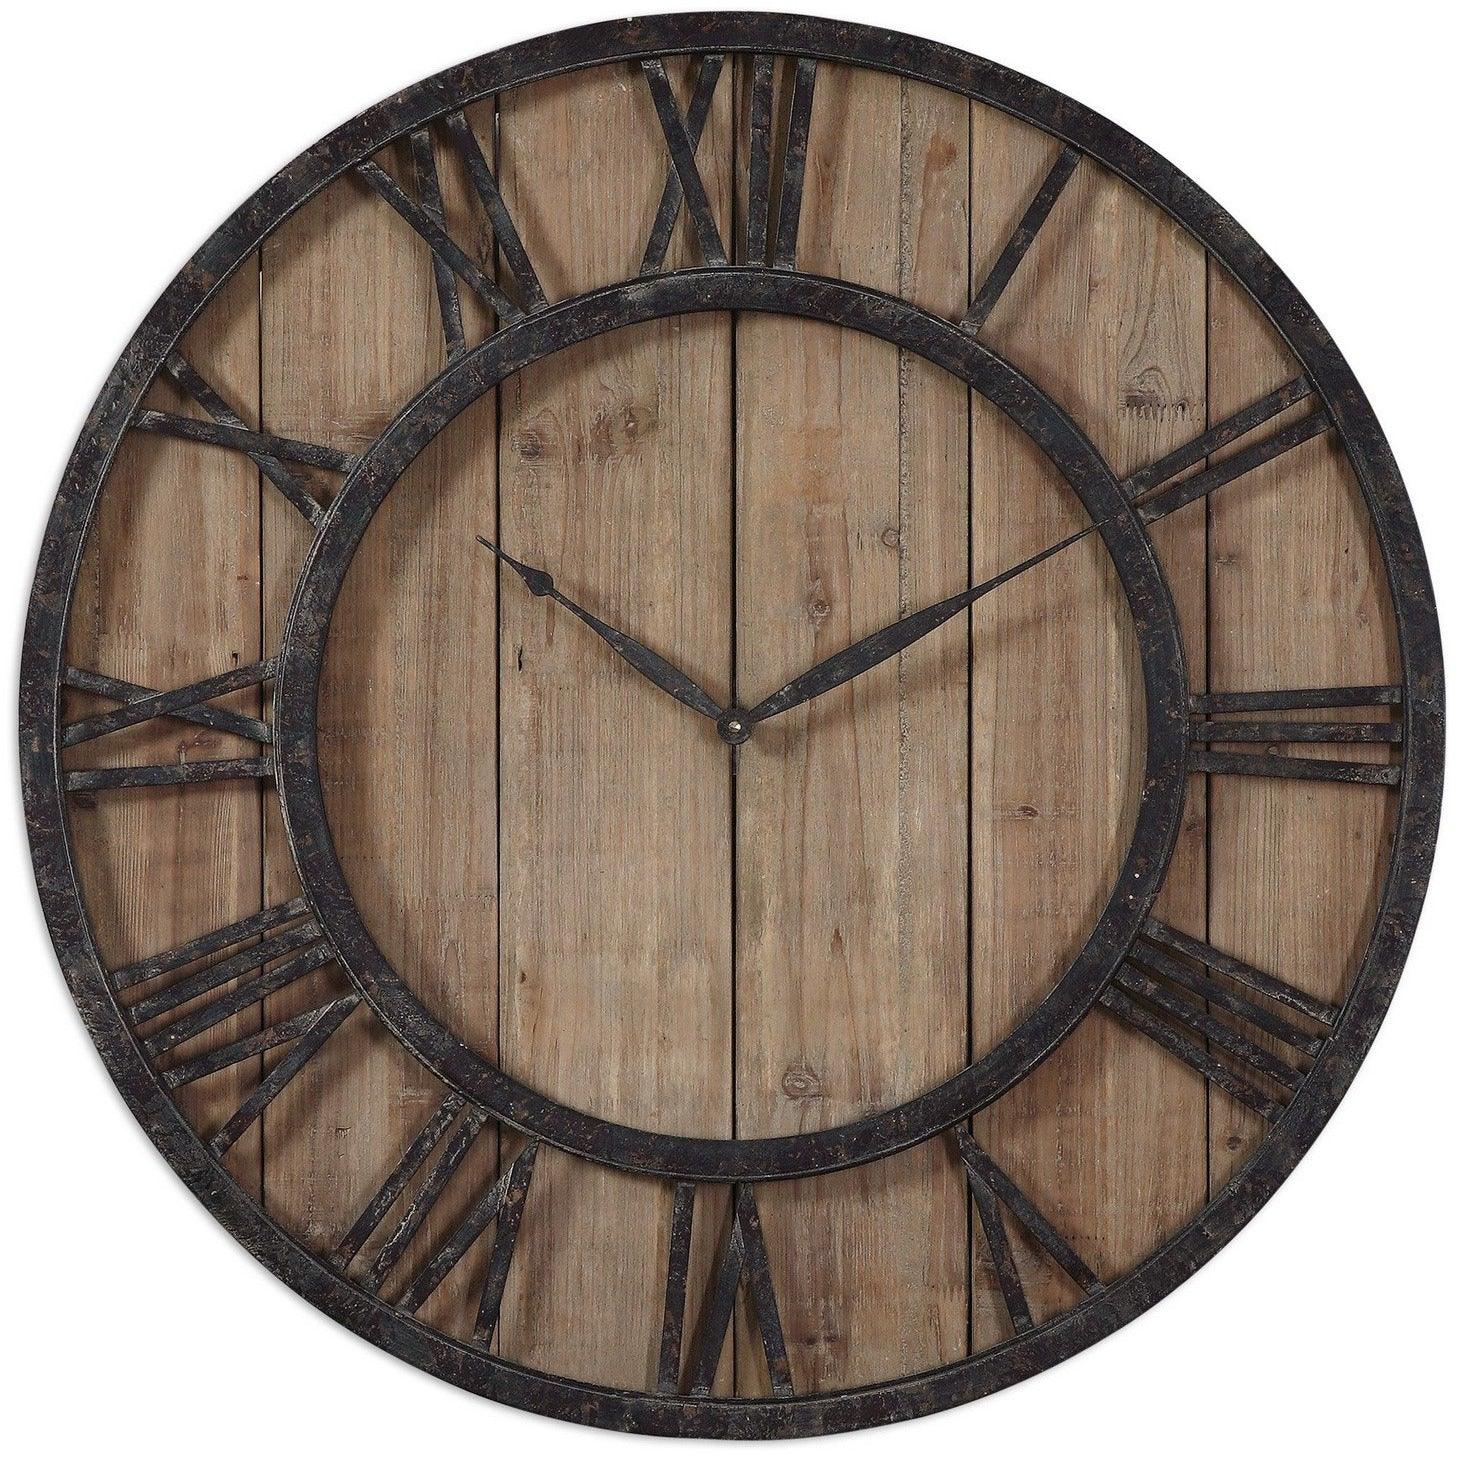 The Uttermost - Powell Wall Clock - 06344 | Montreal Lighting & Hardware